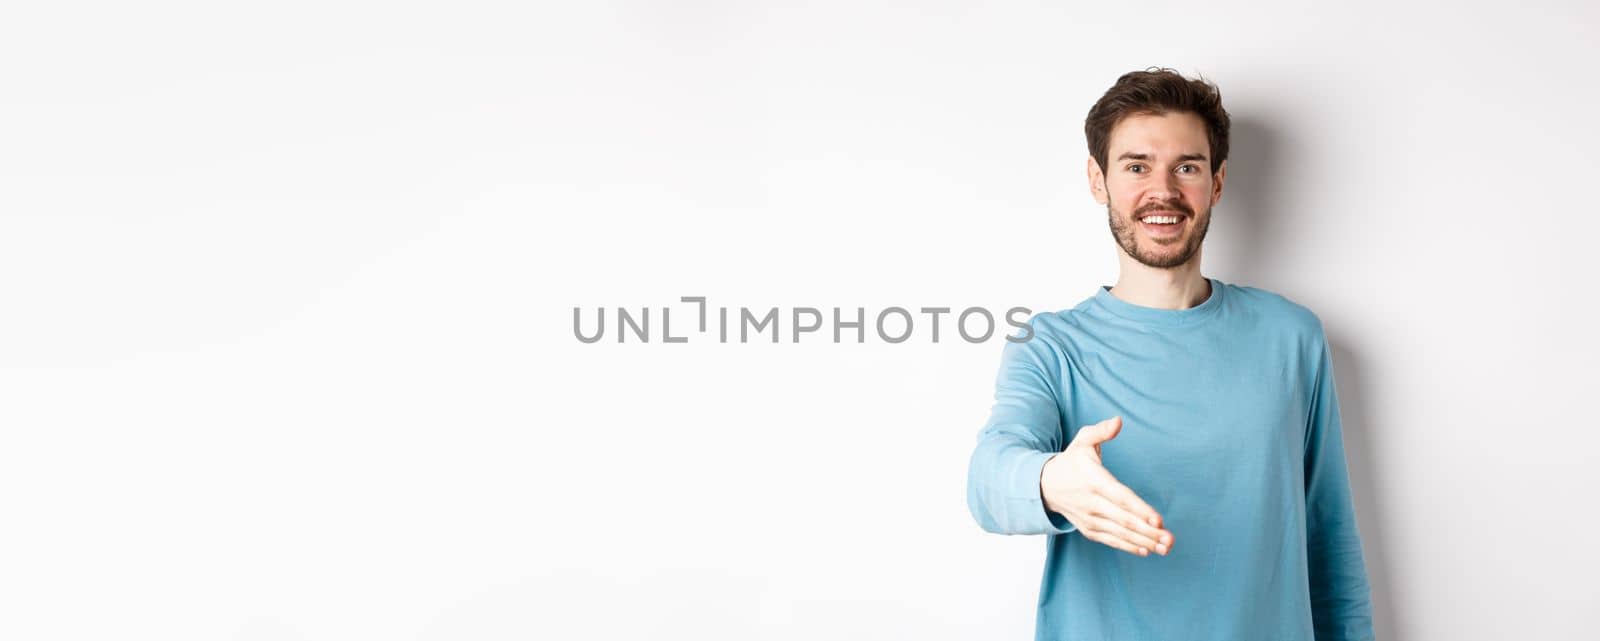 Friendly smiling man stretch out hand, saying hello and give arm for handshake, standing over white background.